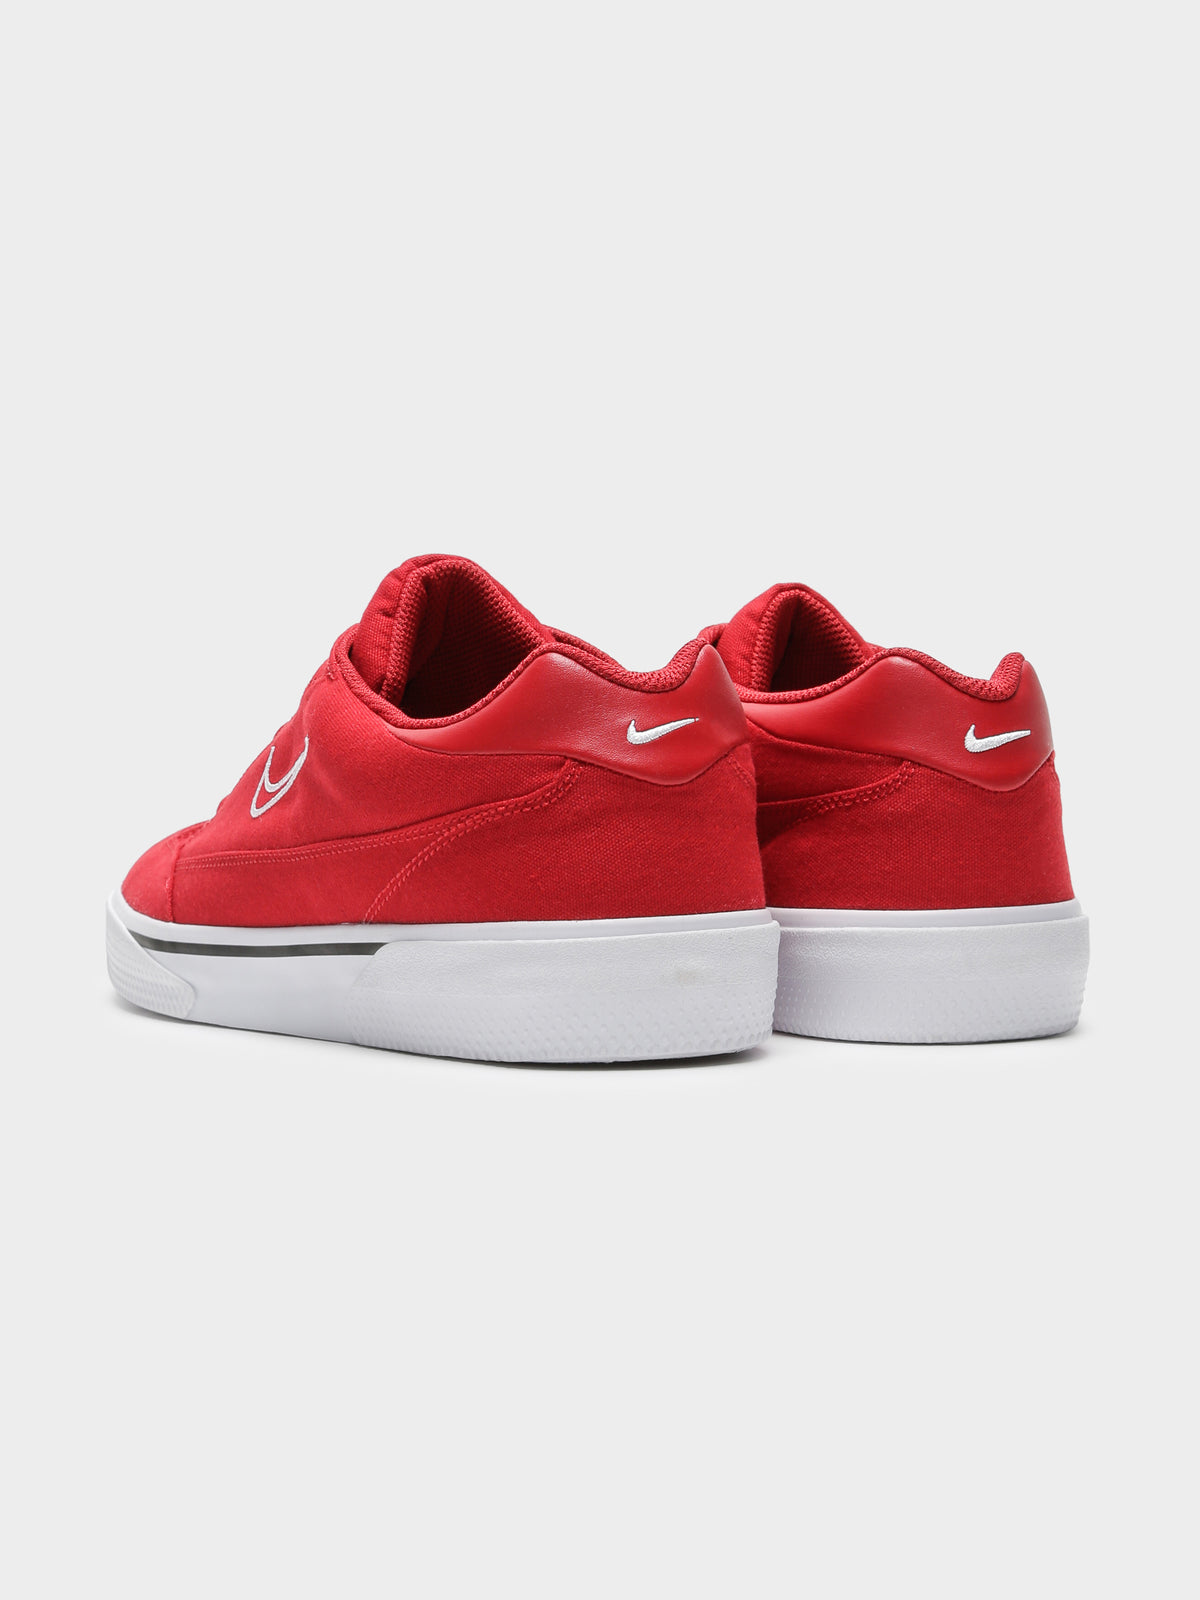 Mens Retro GTS Sneakers in Red